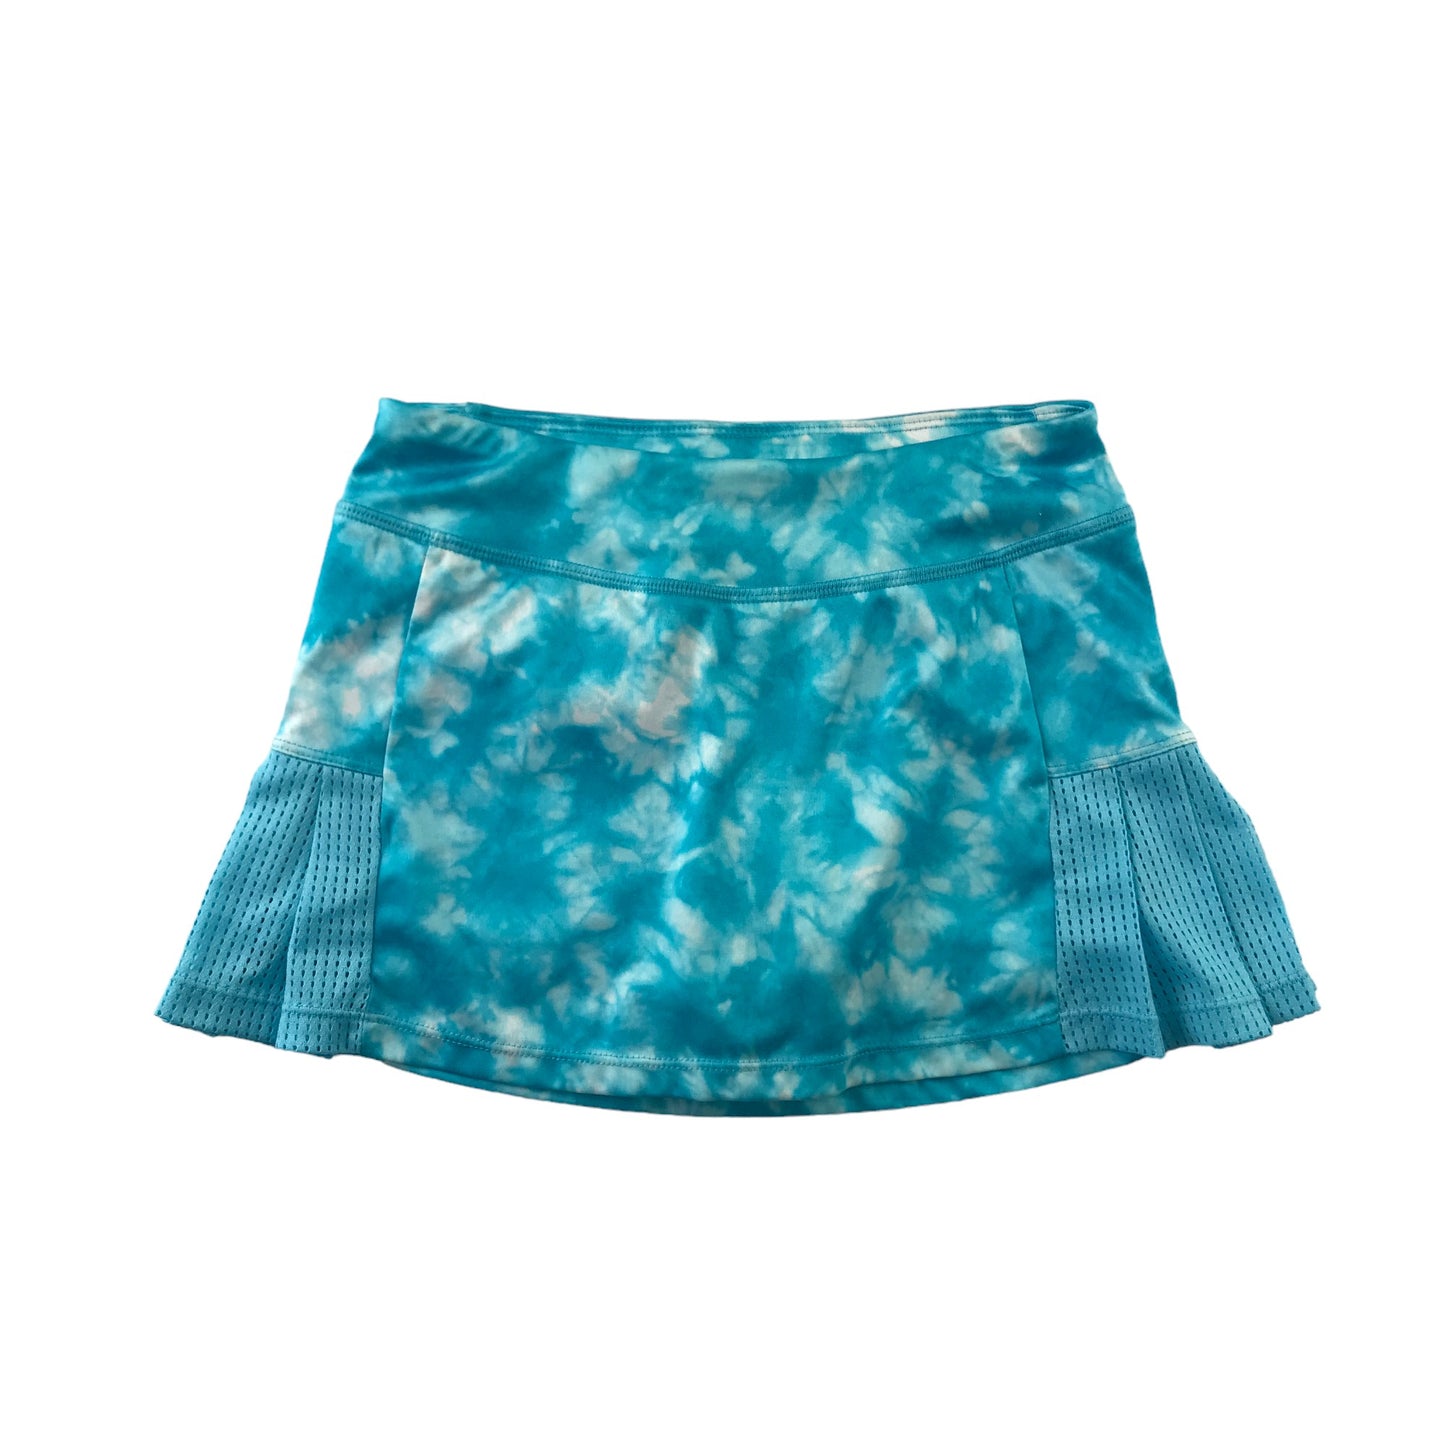 Champion Tennis Skirt Age 7 Blue Graphic Skirt with Under Shorts